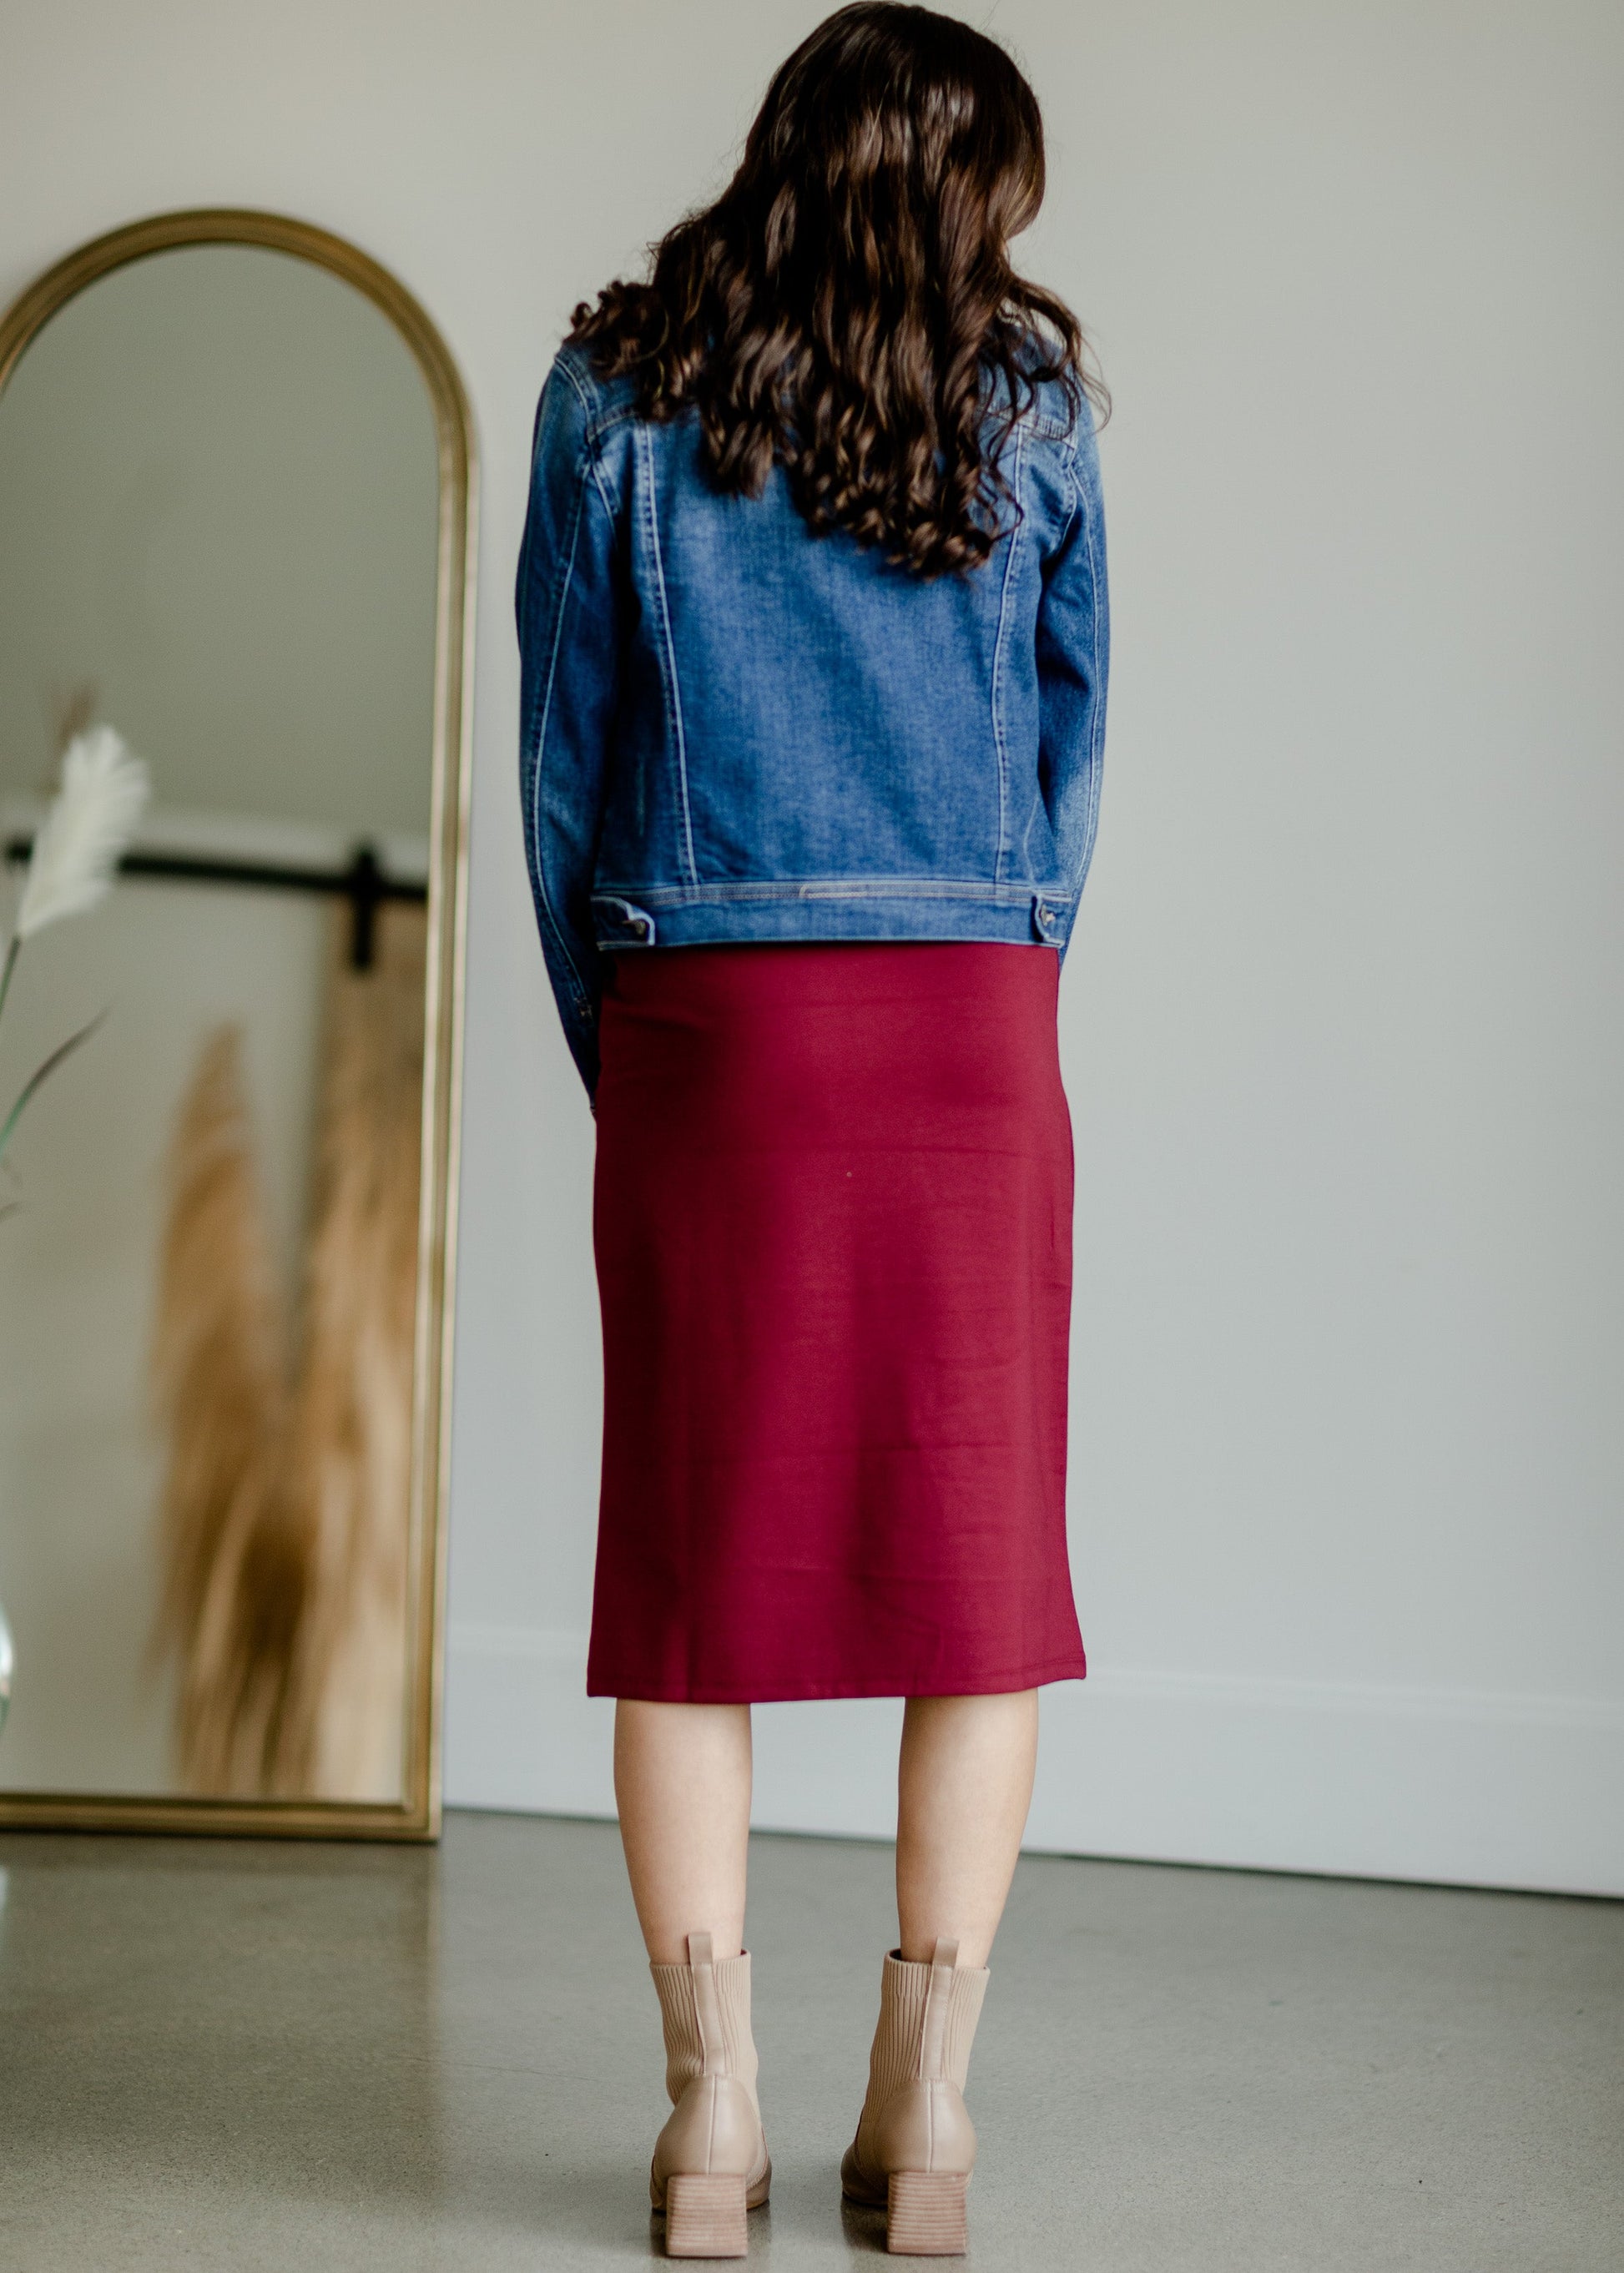 This is the quinn knit midi skirt that is made of high quality knit with a stretch waistband and is in a streight fit.